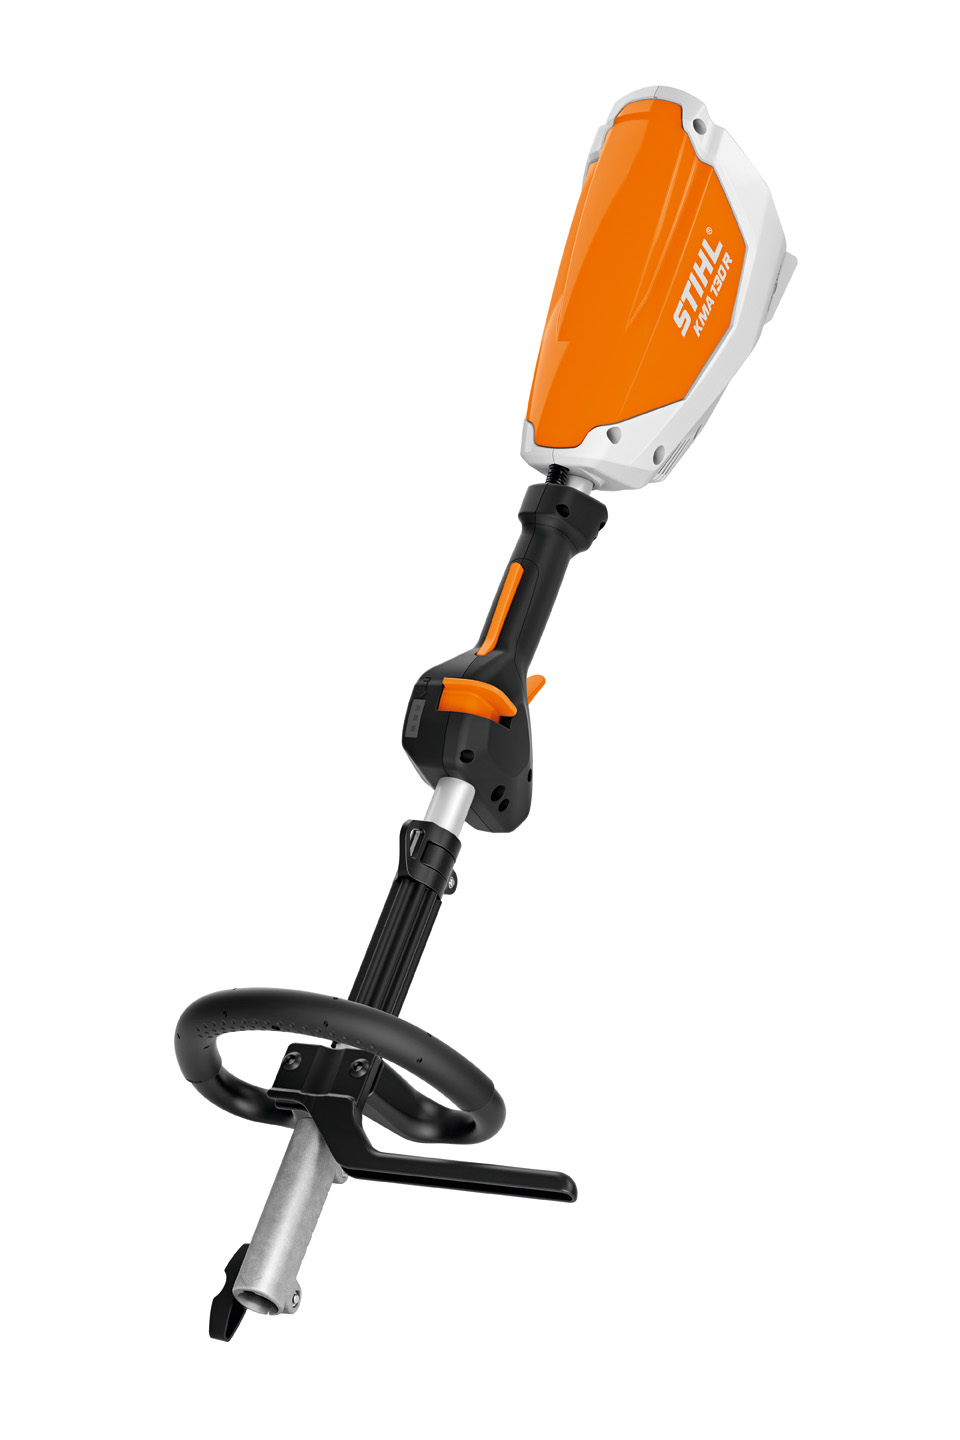 STIHL KMA 130 R KombiEngine from the AP-System